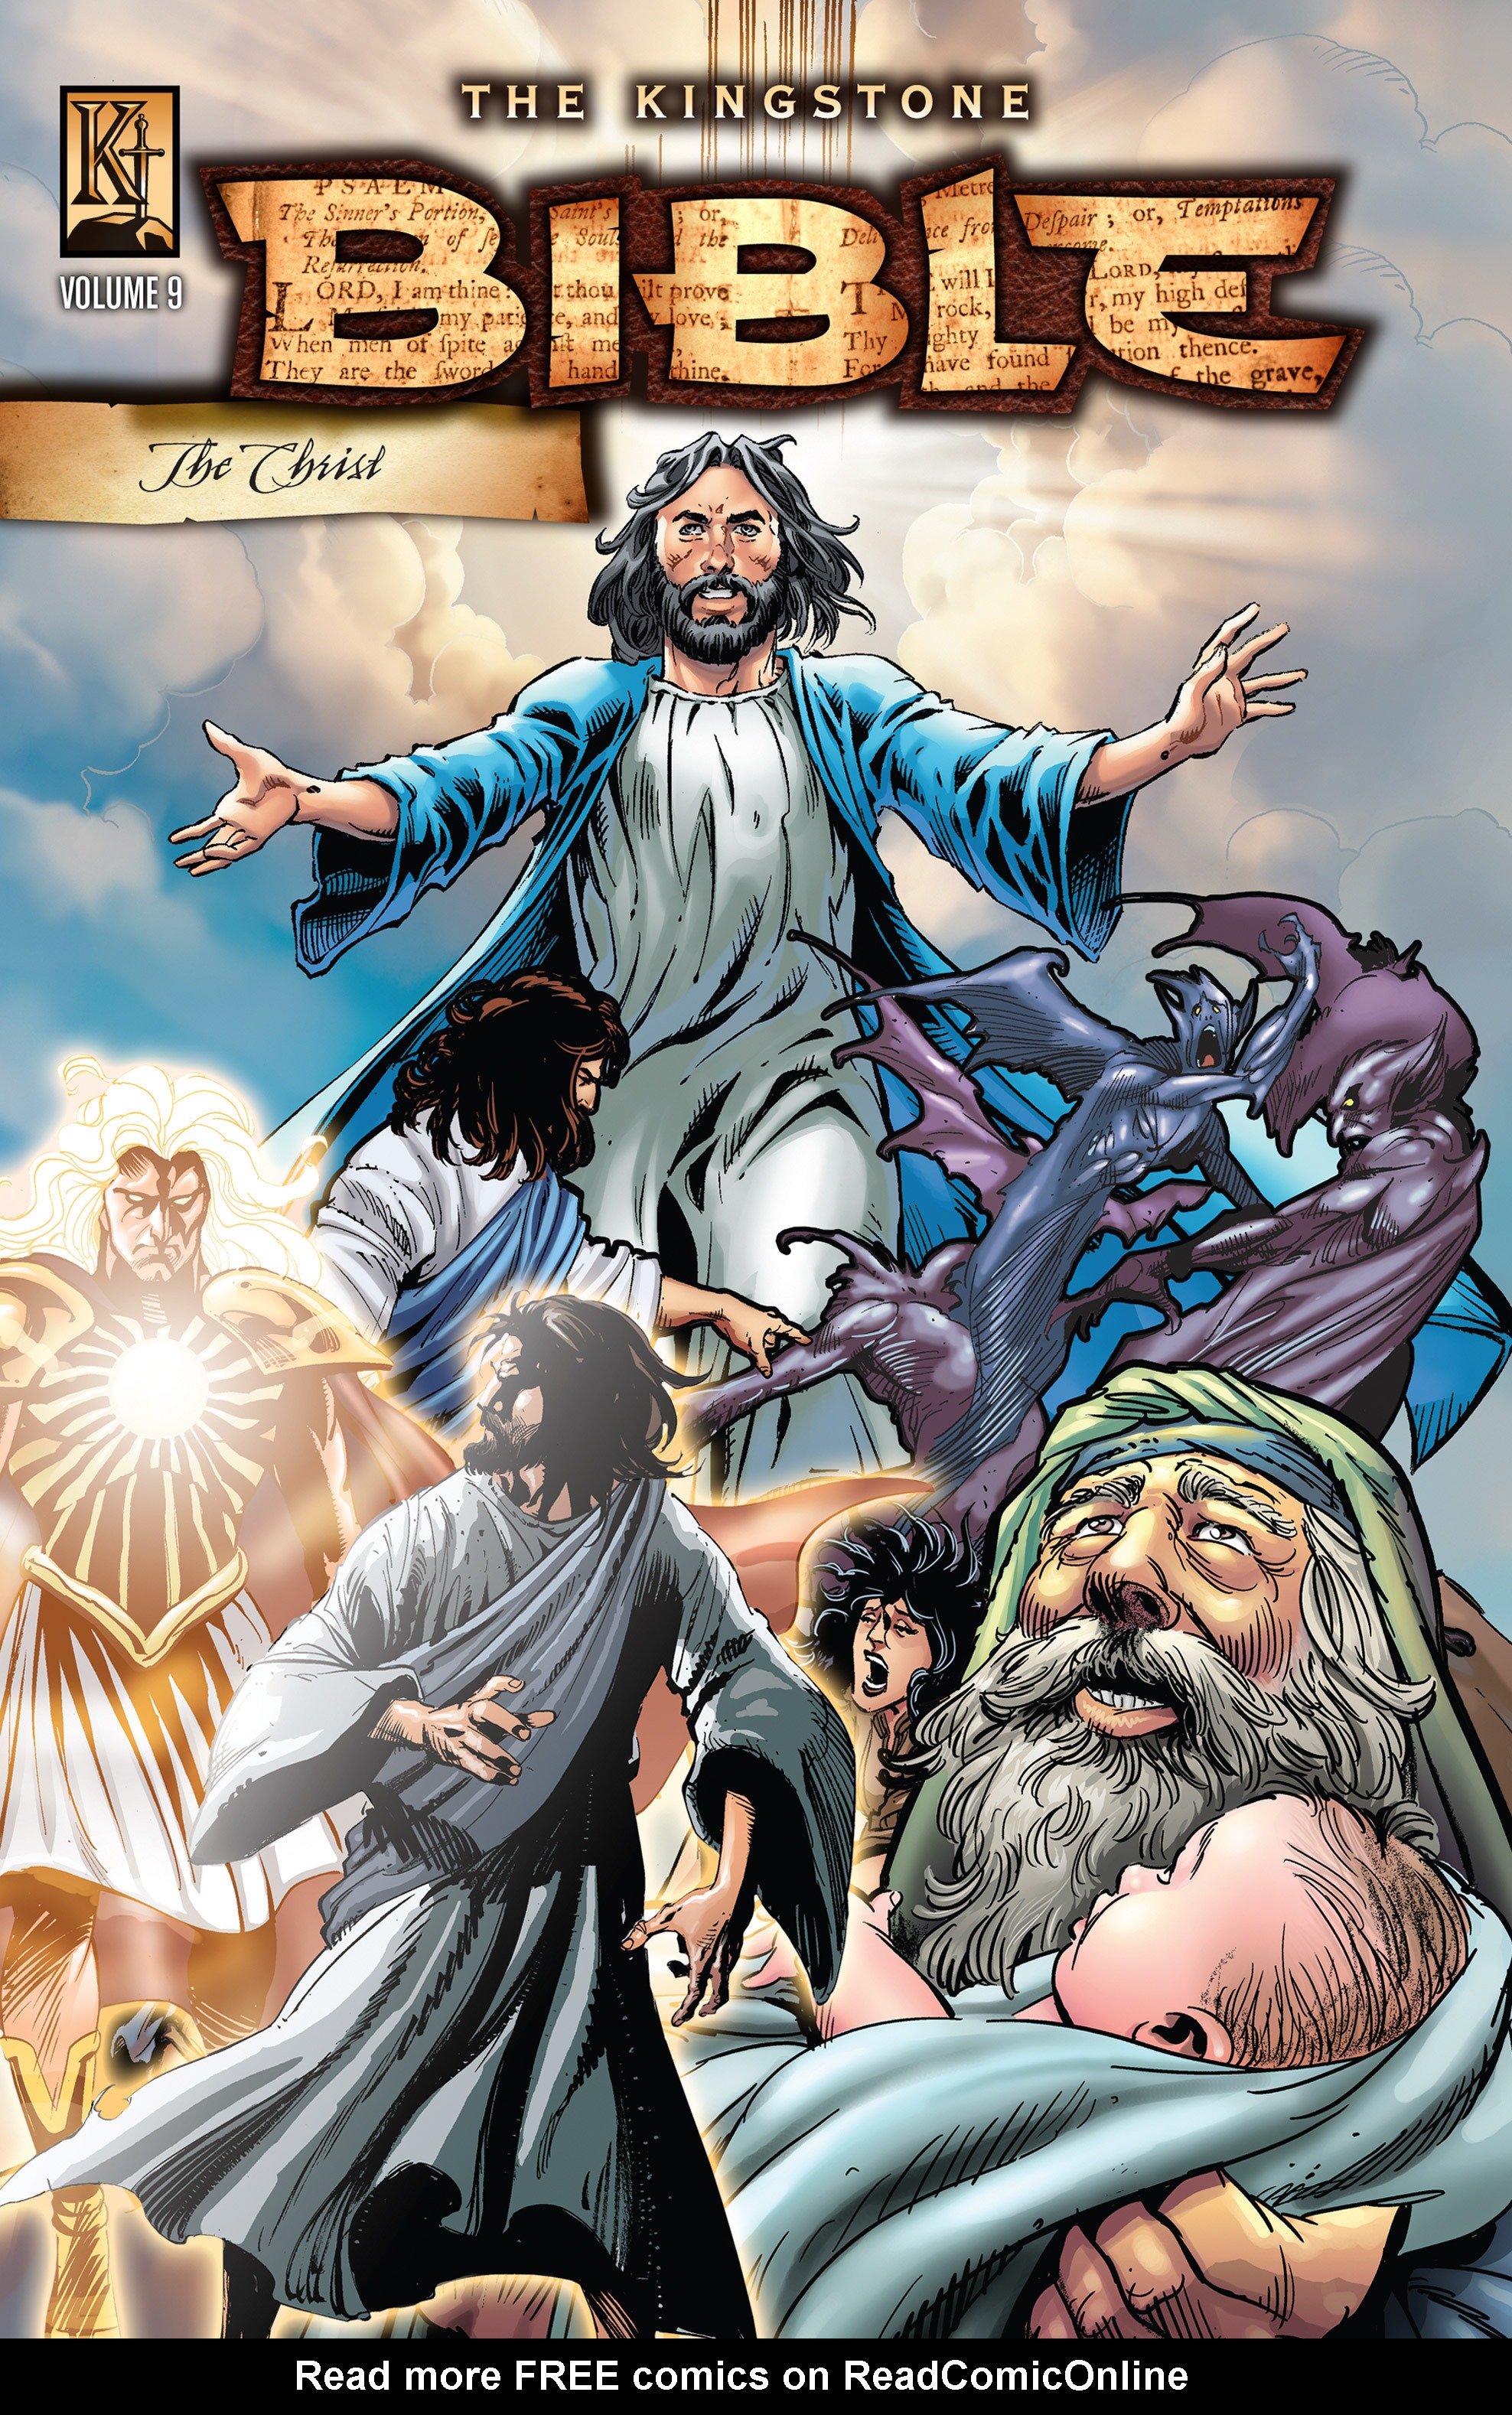 The Kingstone Bible Issue 9 | Read The Kingstone Bible Issue 9 comic online  in high quality. Read Full Comic online for free - Read comics online in  high quality .|viewcomiconline.com